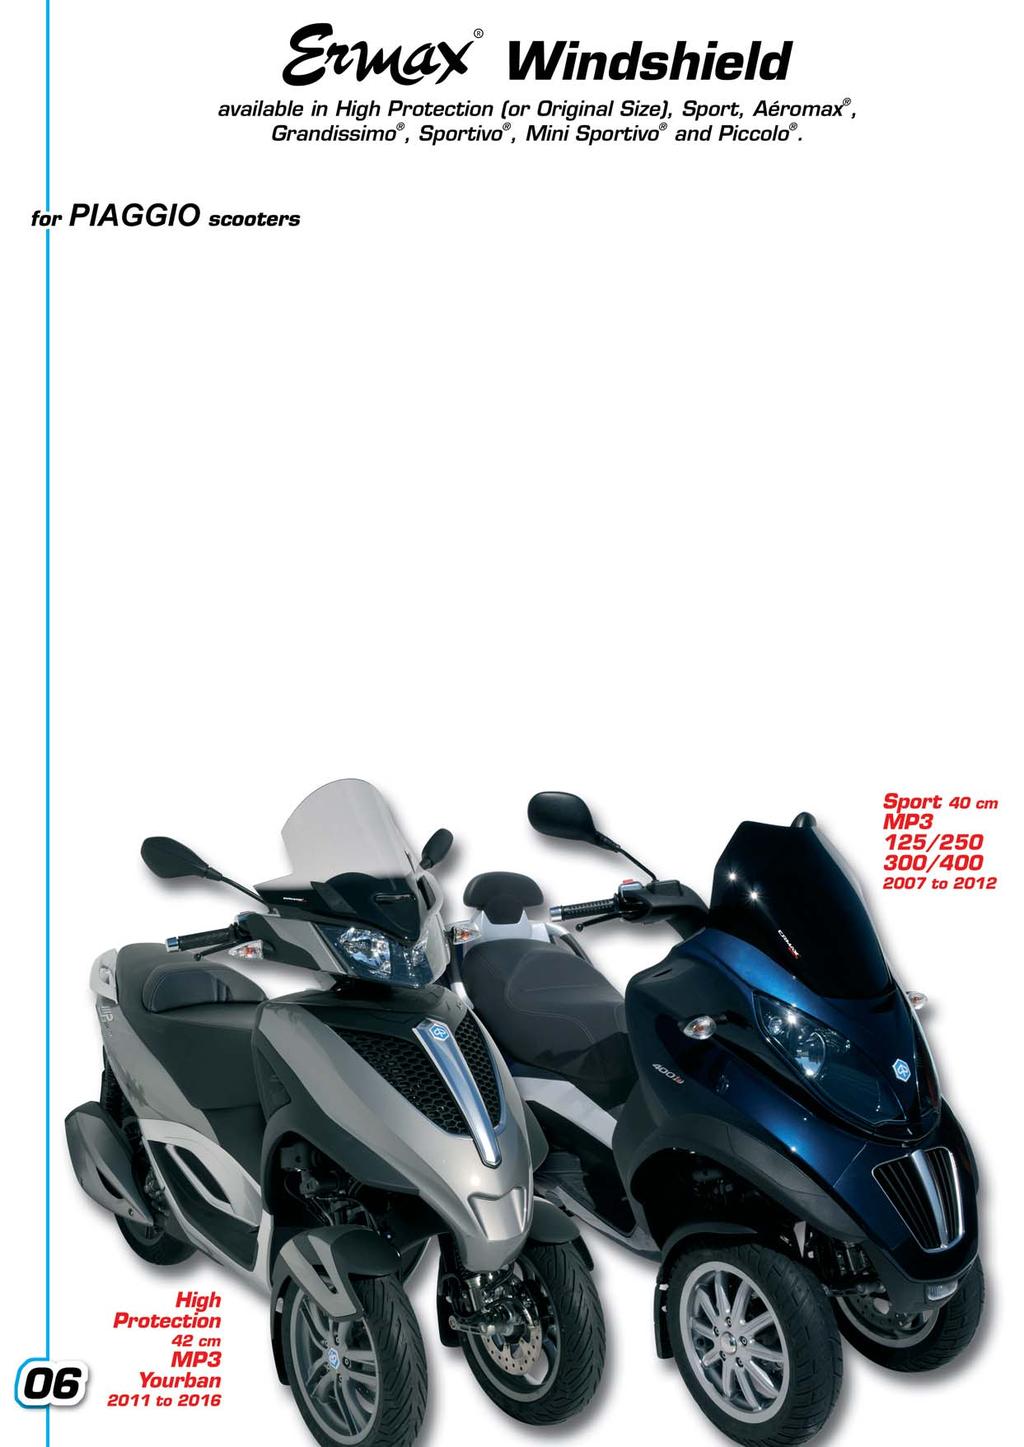 The use of the PIAGGIO brand andor photos representing PIAGGIO scooter models is made solely for customers information to indicate our products destination as accessories for these scooters.